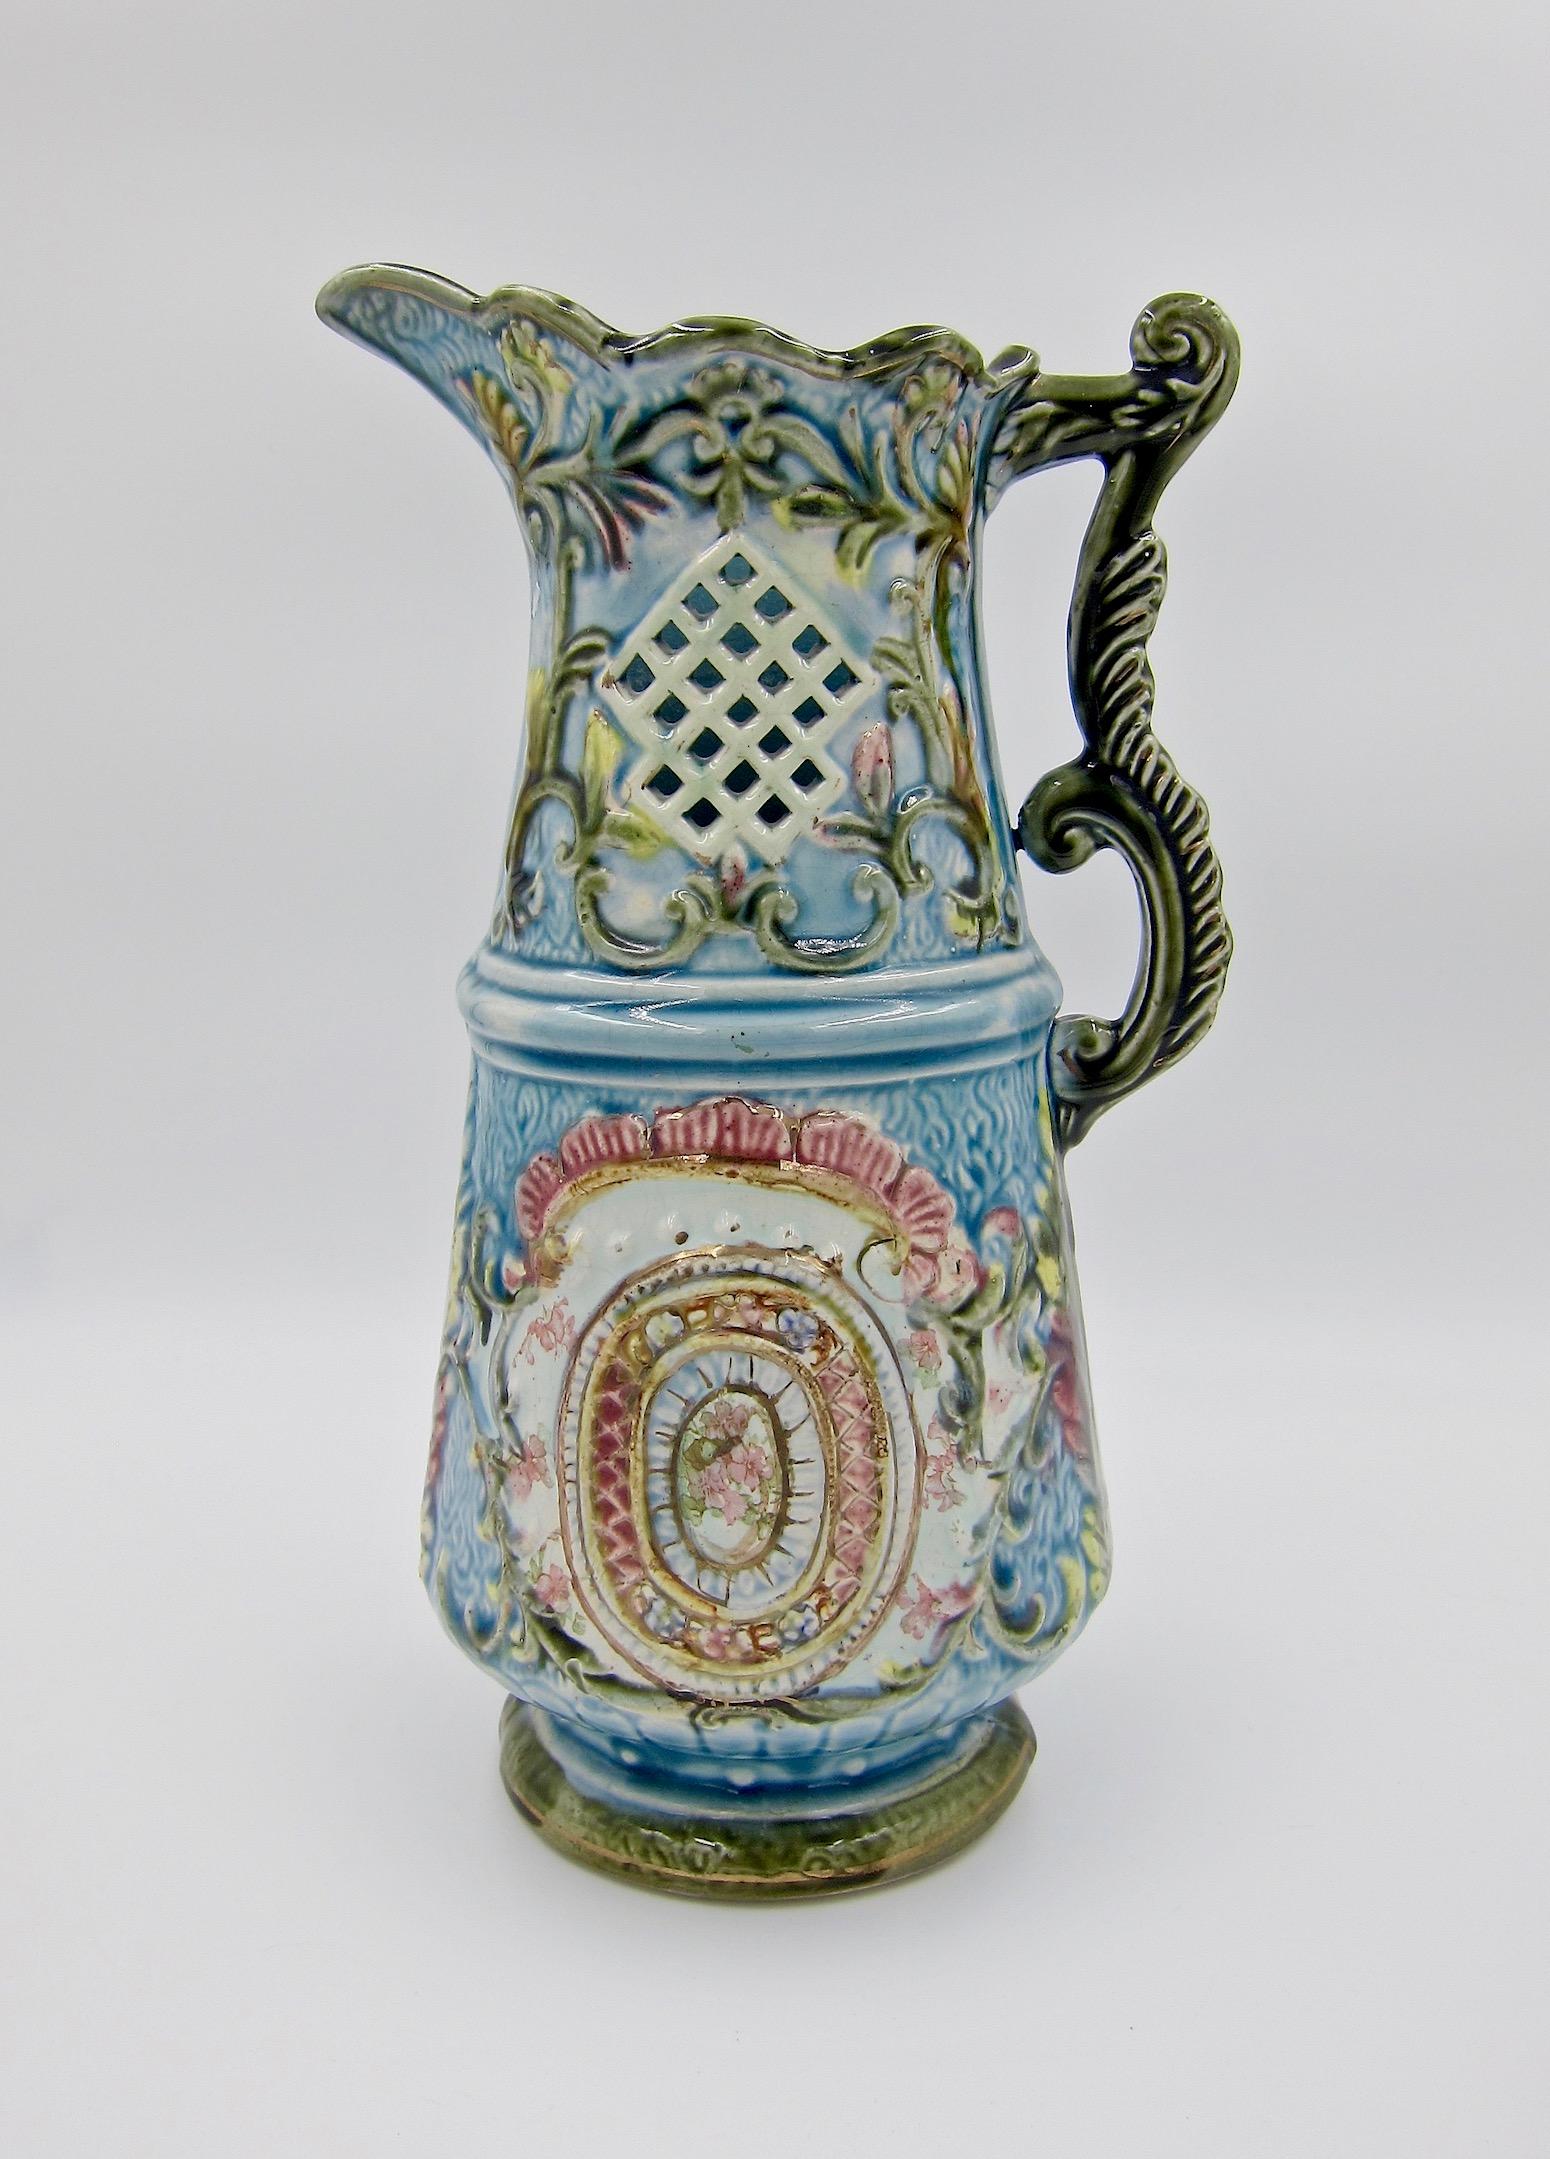 An ornate late 19th century European Majolica pitcher on a spreading foot with scrolling handles and pierced, diamond pattern accents. The Victorian era design includes molded flowers, foliage and shell motifs hand-painted in pink, yellow, and green